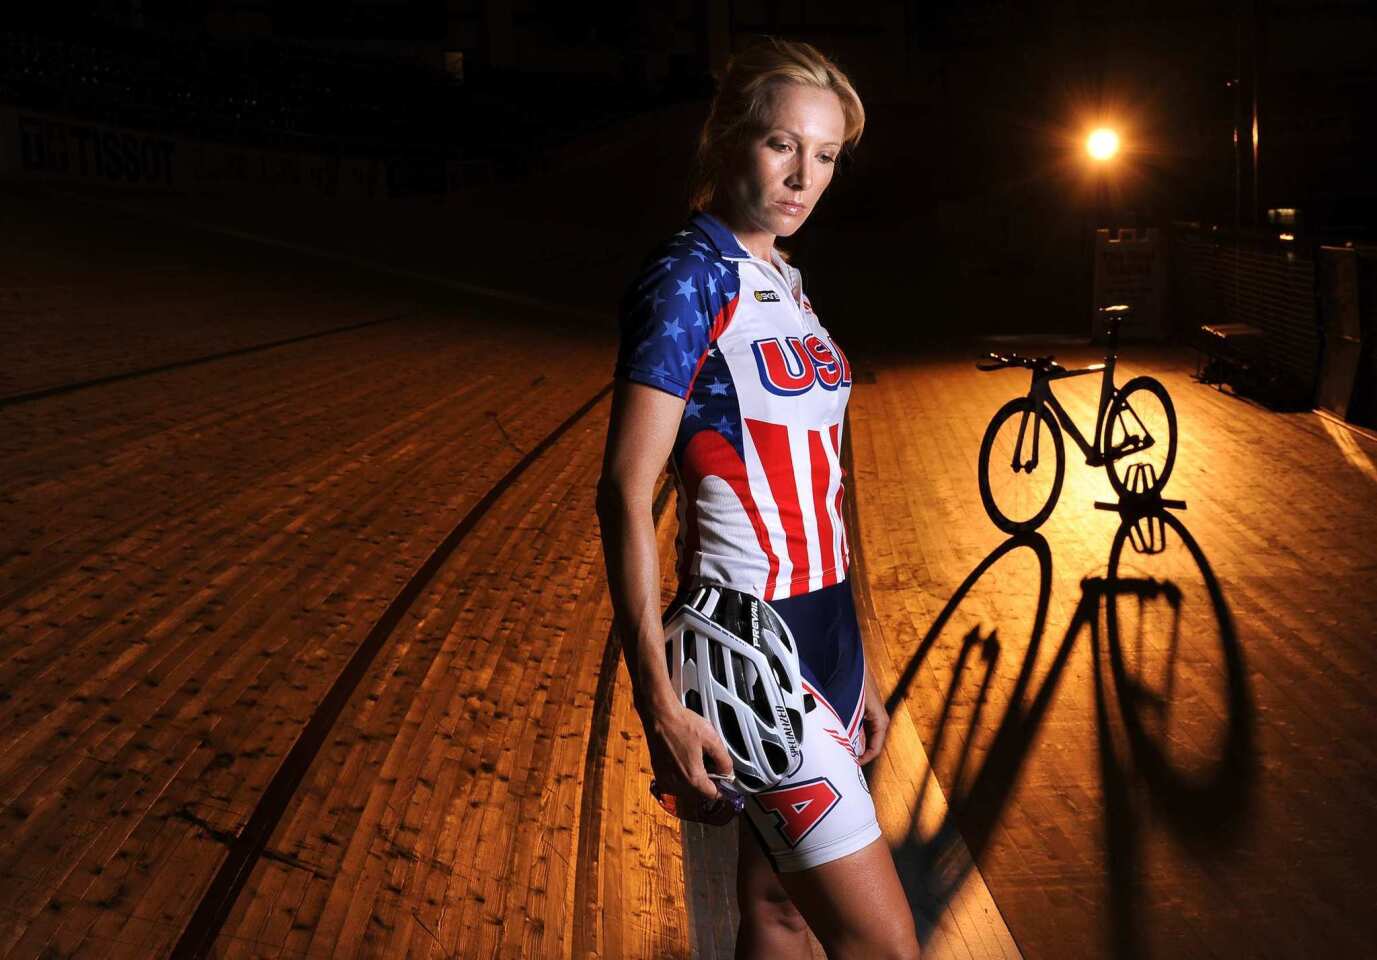 Olympic hopeful Dotsie Bausch, 38, may be the oldest of five candidates trying to secure four spots on the U.S. women's track cycling team, but she isn't letting her age -- or pain -- stop her from accomplishing her dream.